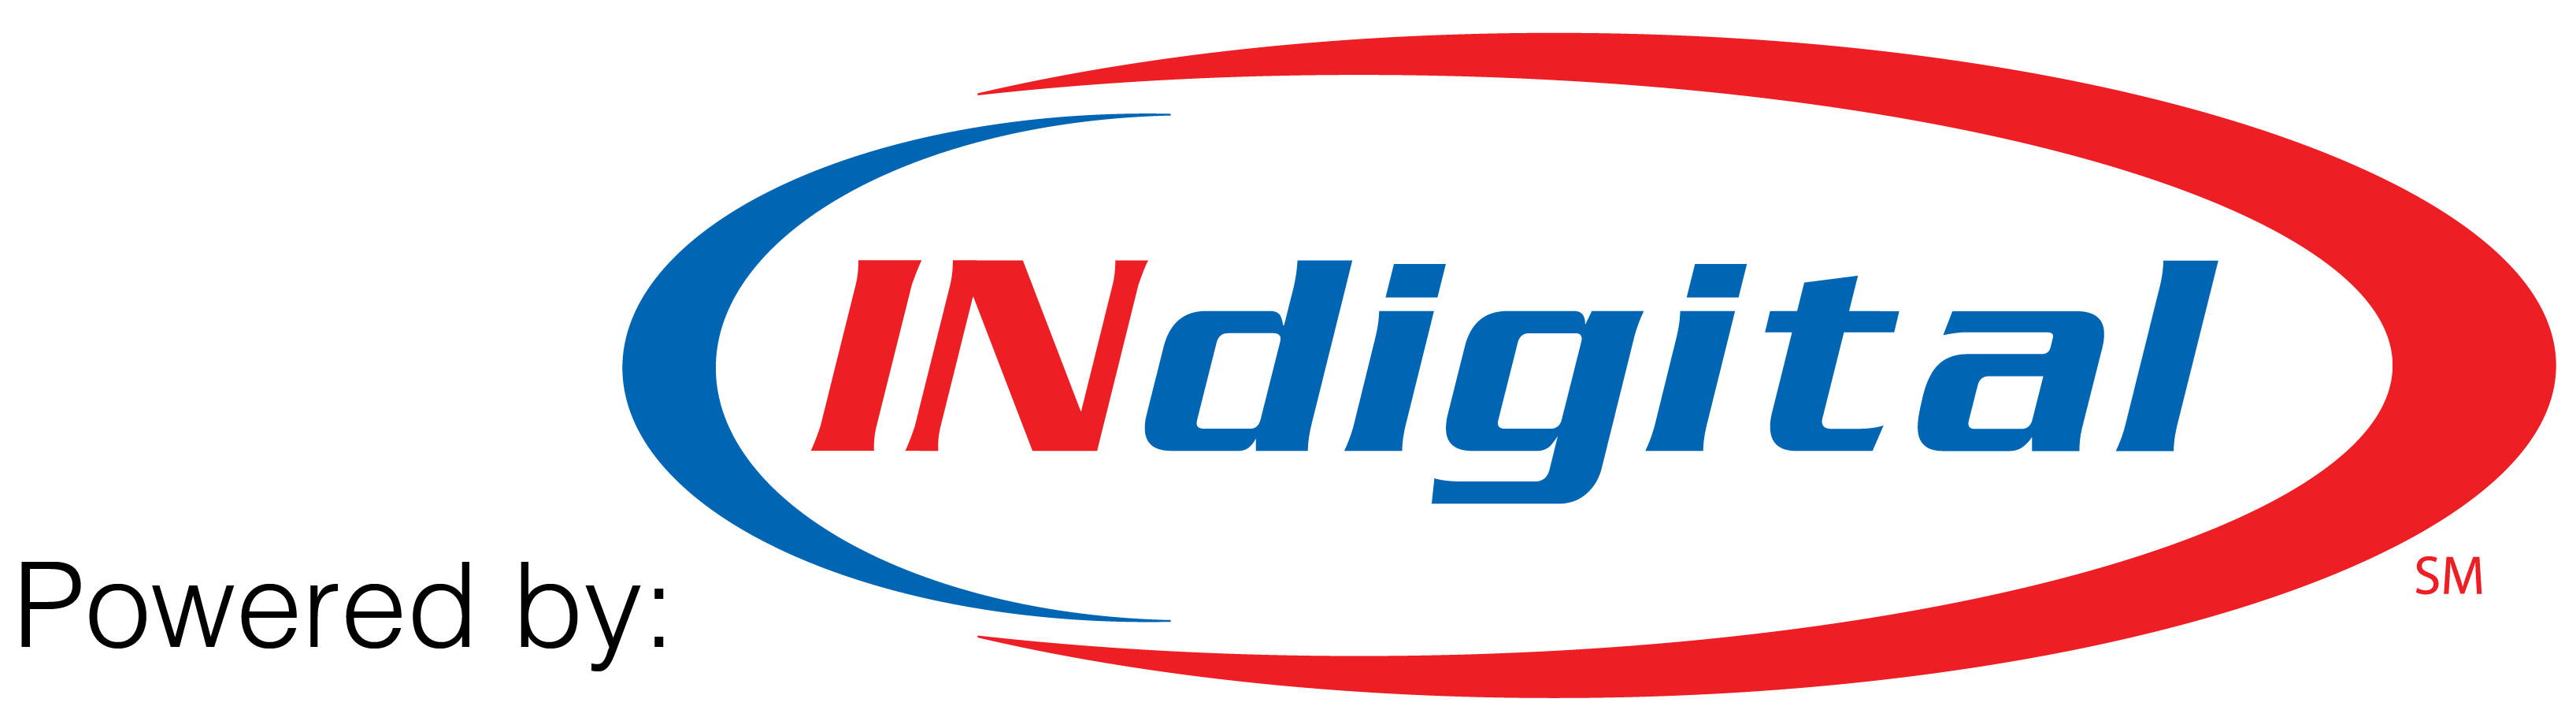 Powered by INdigital